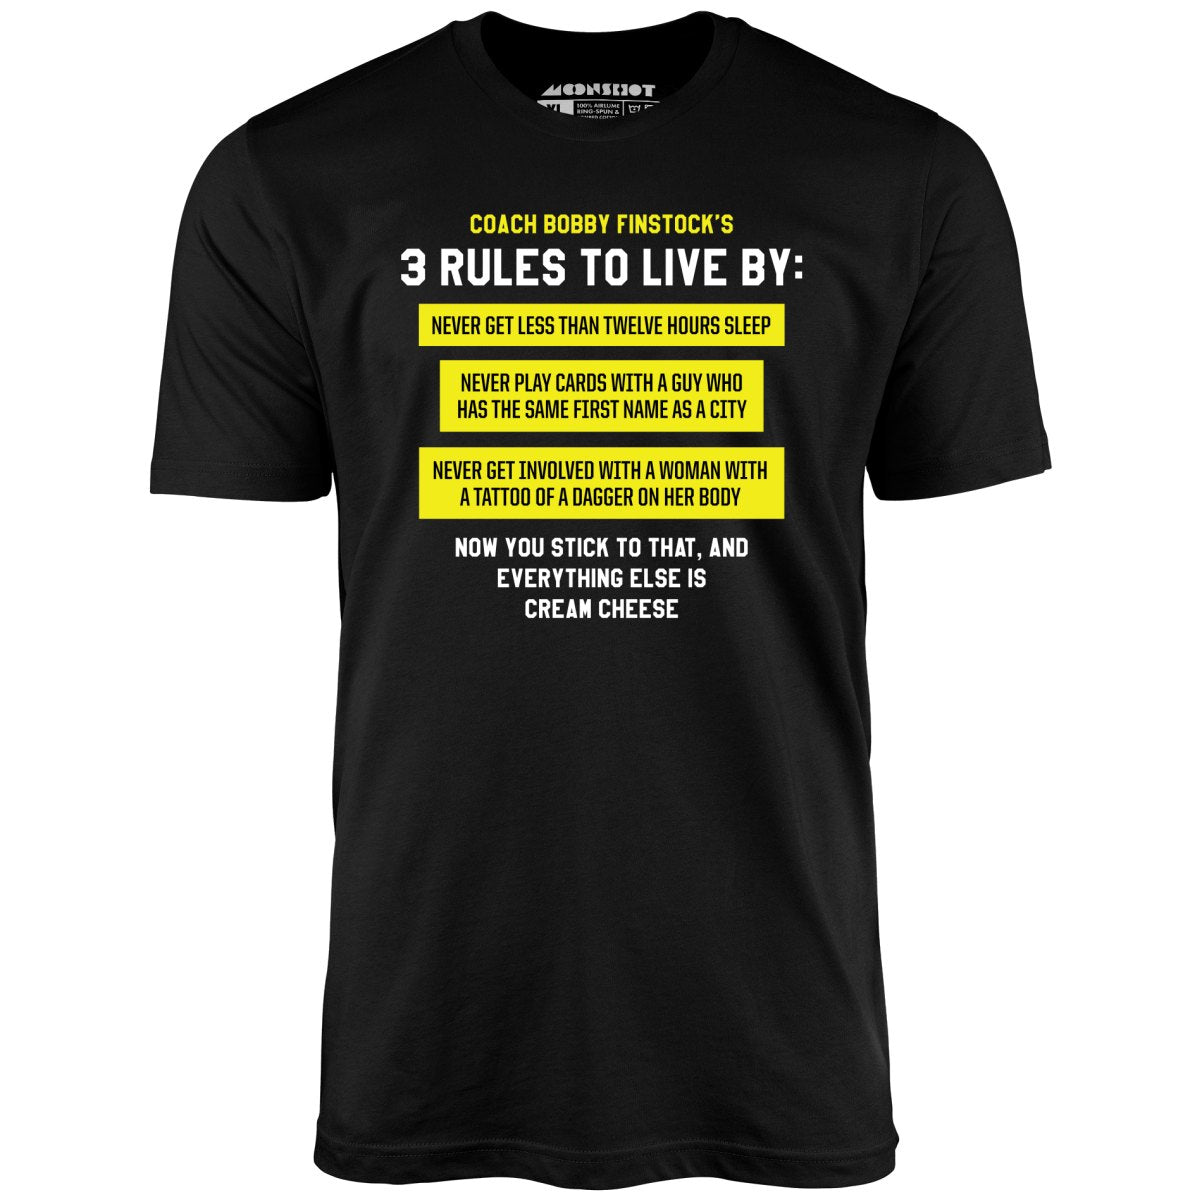 Coach Bobby Finstock's 3 Rules to Live By - Unisex T-Shirt